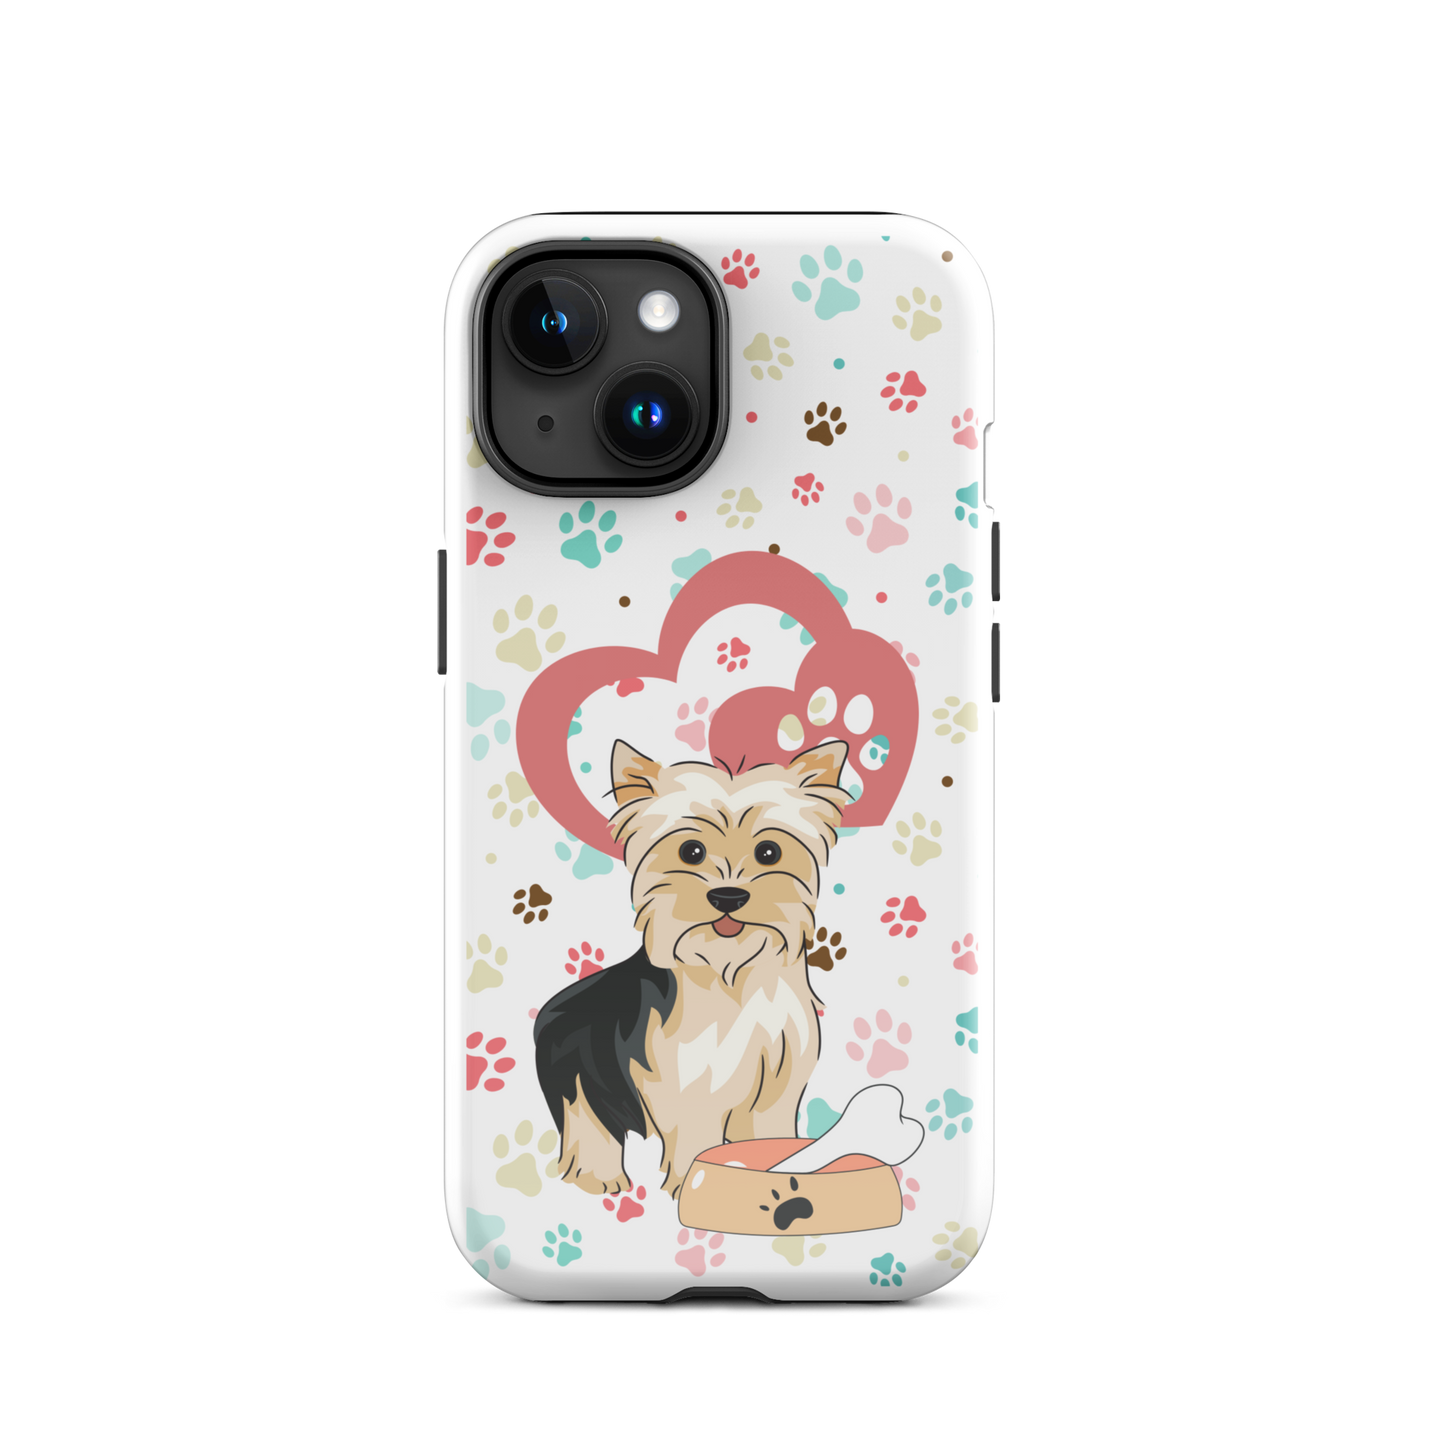 Tough case for iPhone 14, 15, Plus, Pro, Pro Max | Dog Themed